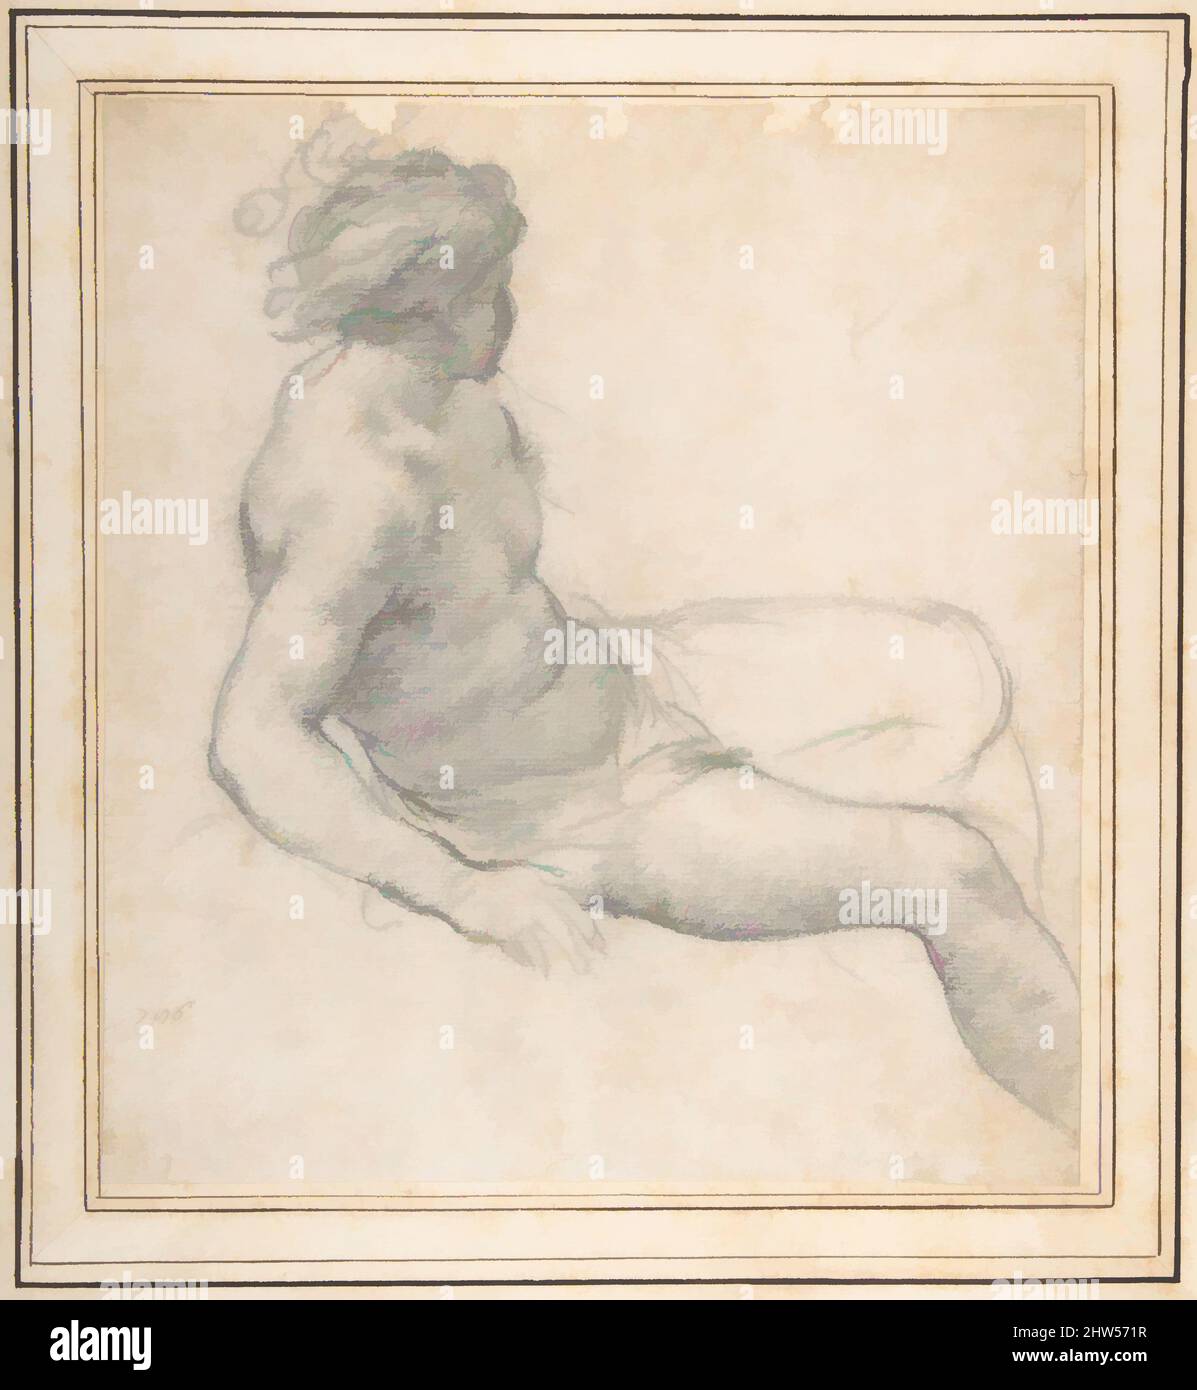 Art inspired by Study of a Seated Youth for the Age of Gold, 1637, Black chalk, 11-1/4 x 10-1/4 in. (28.6 x 26 cm), Drawings, Pietro da Cortona (Pietro Berrettini) (Italian, Cortona 1596–1669 Rome), In June 1637, Pietro da Cortona, the leading Italian Baroque painter of his time, Classic works modernized by Artotop with a splash of modernity. Shapes, color and value, eye-catching visual impact on art. Emotions through freedom of artworks in a contemporary way. A timeless message pursuing a wildly creative new direction. Artists turning to the digital medium and creating the Artotop NFT Stock Photo